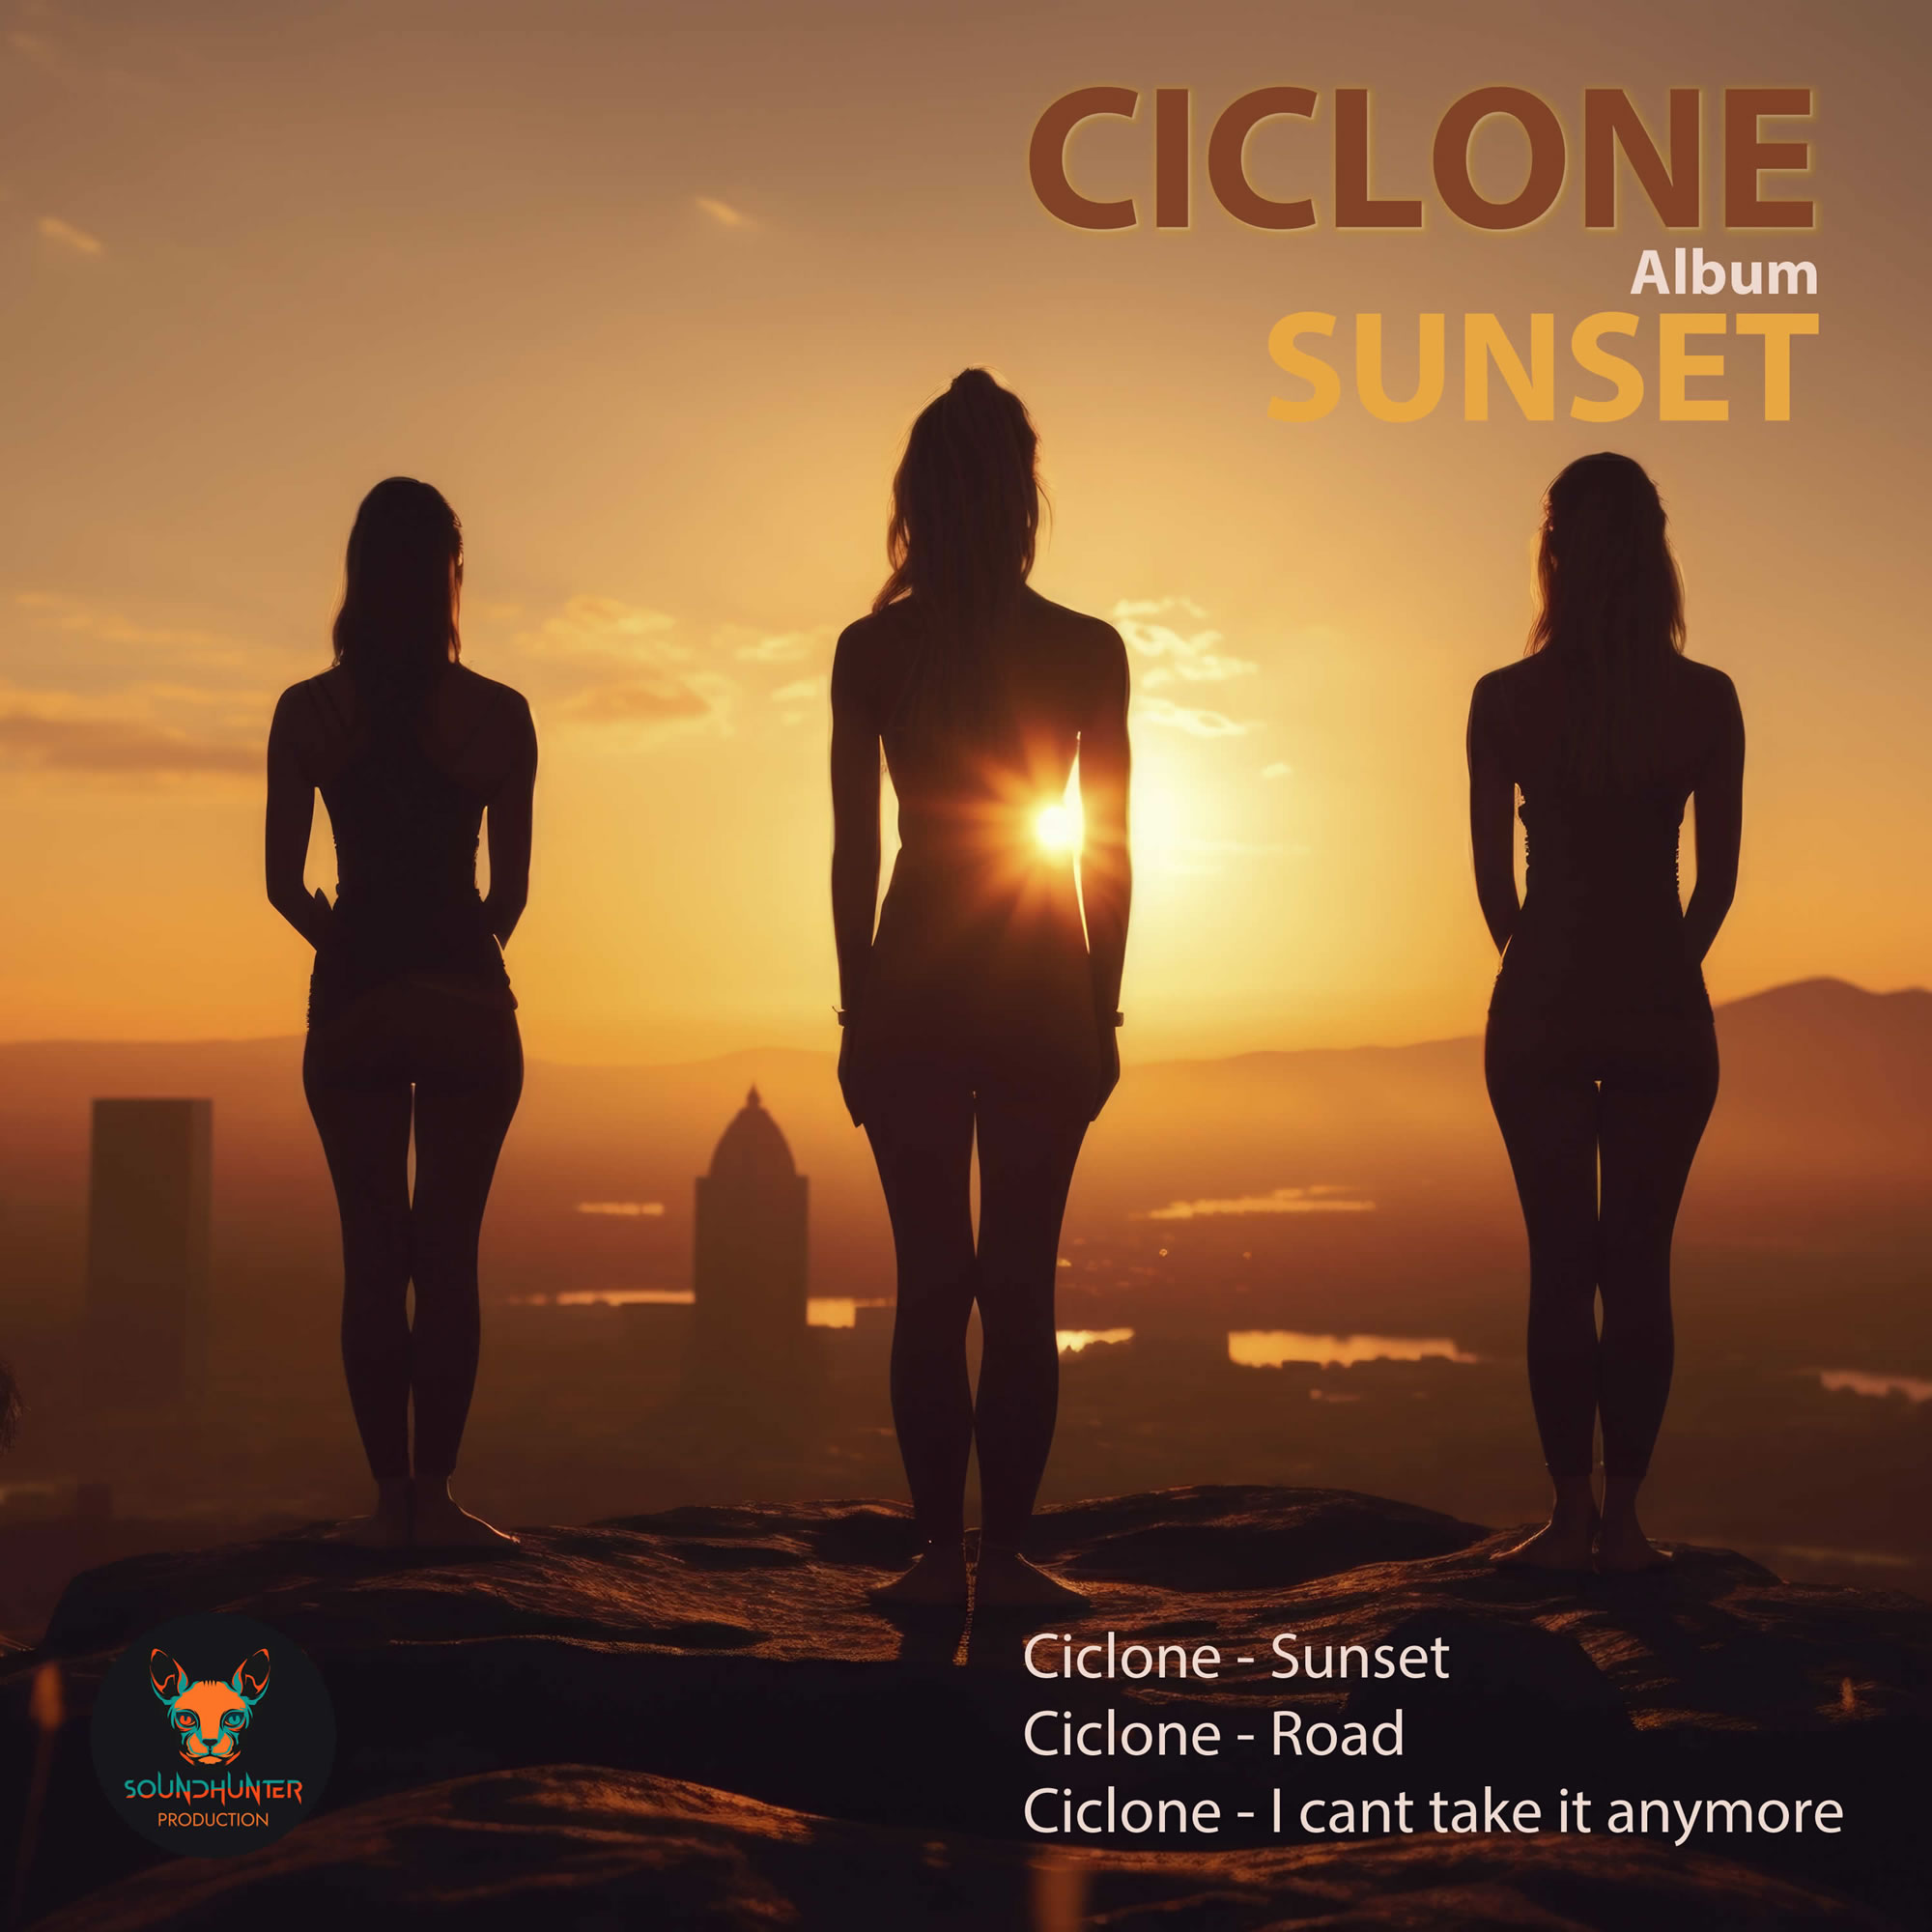 Ciclone - I cant take it anymore